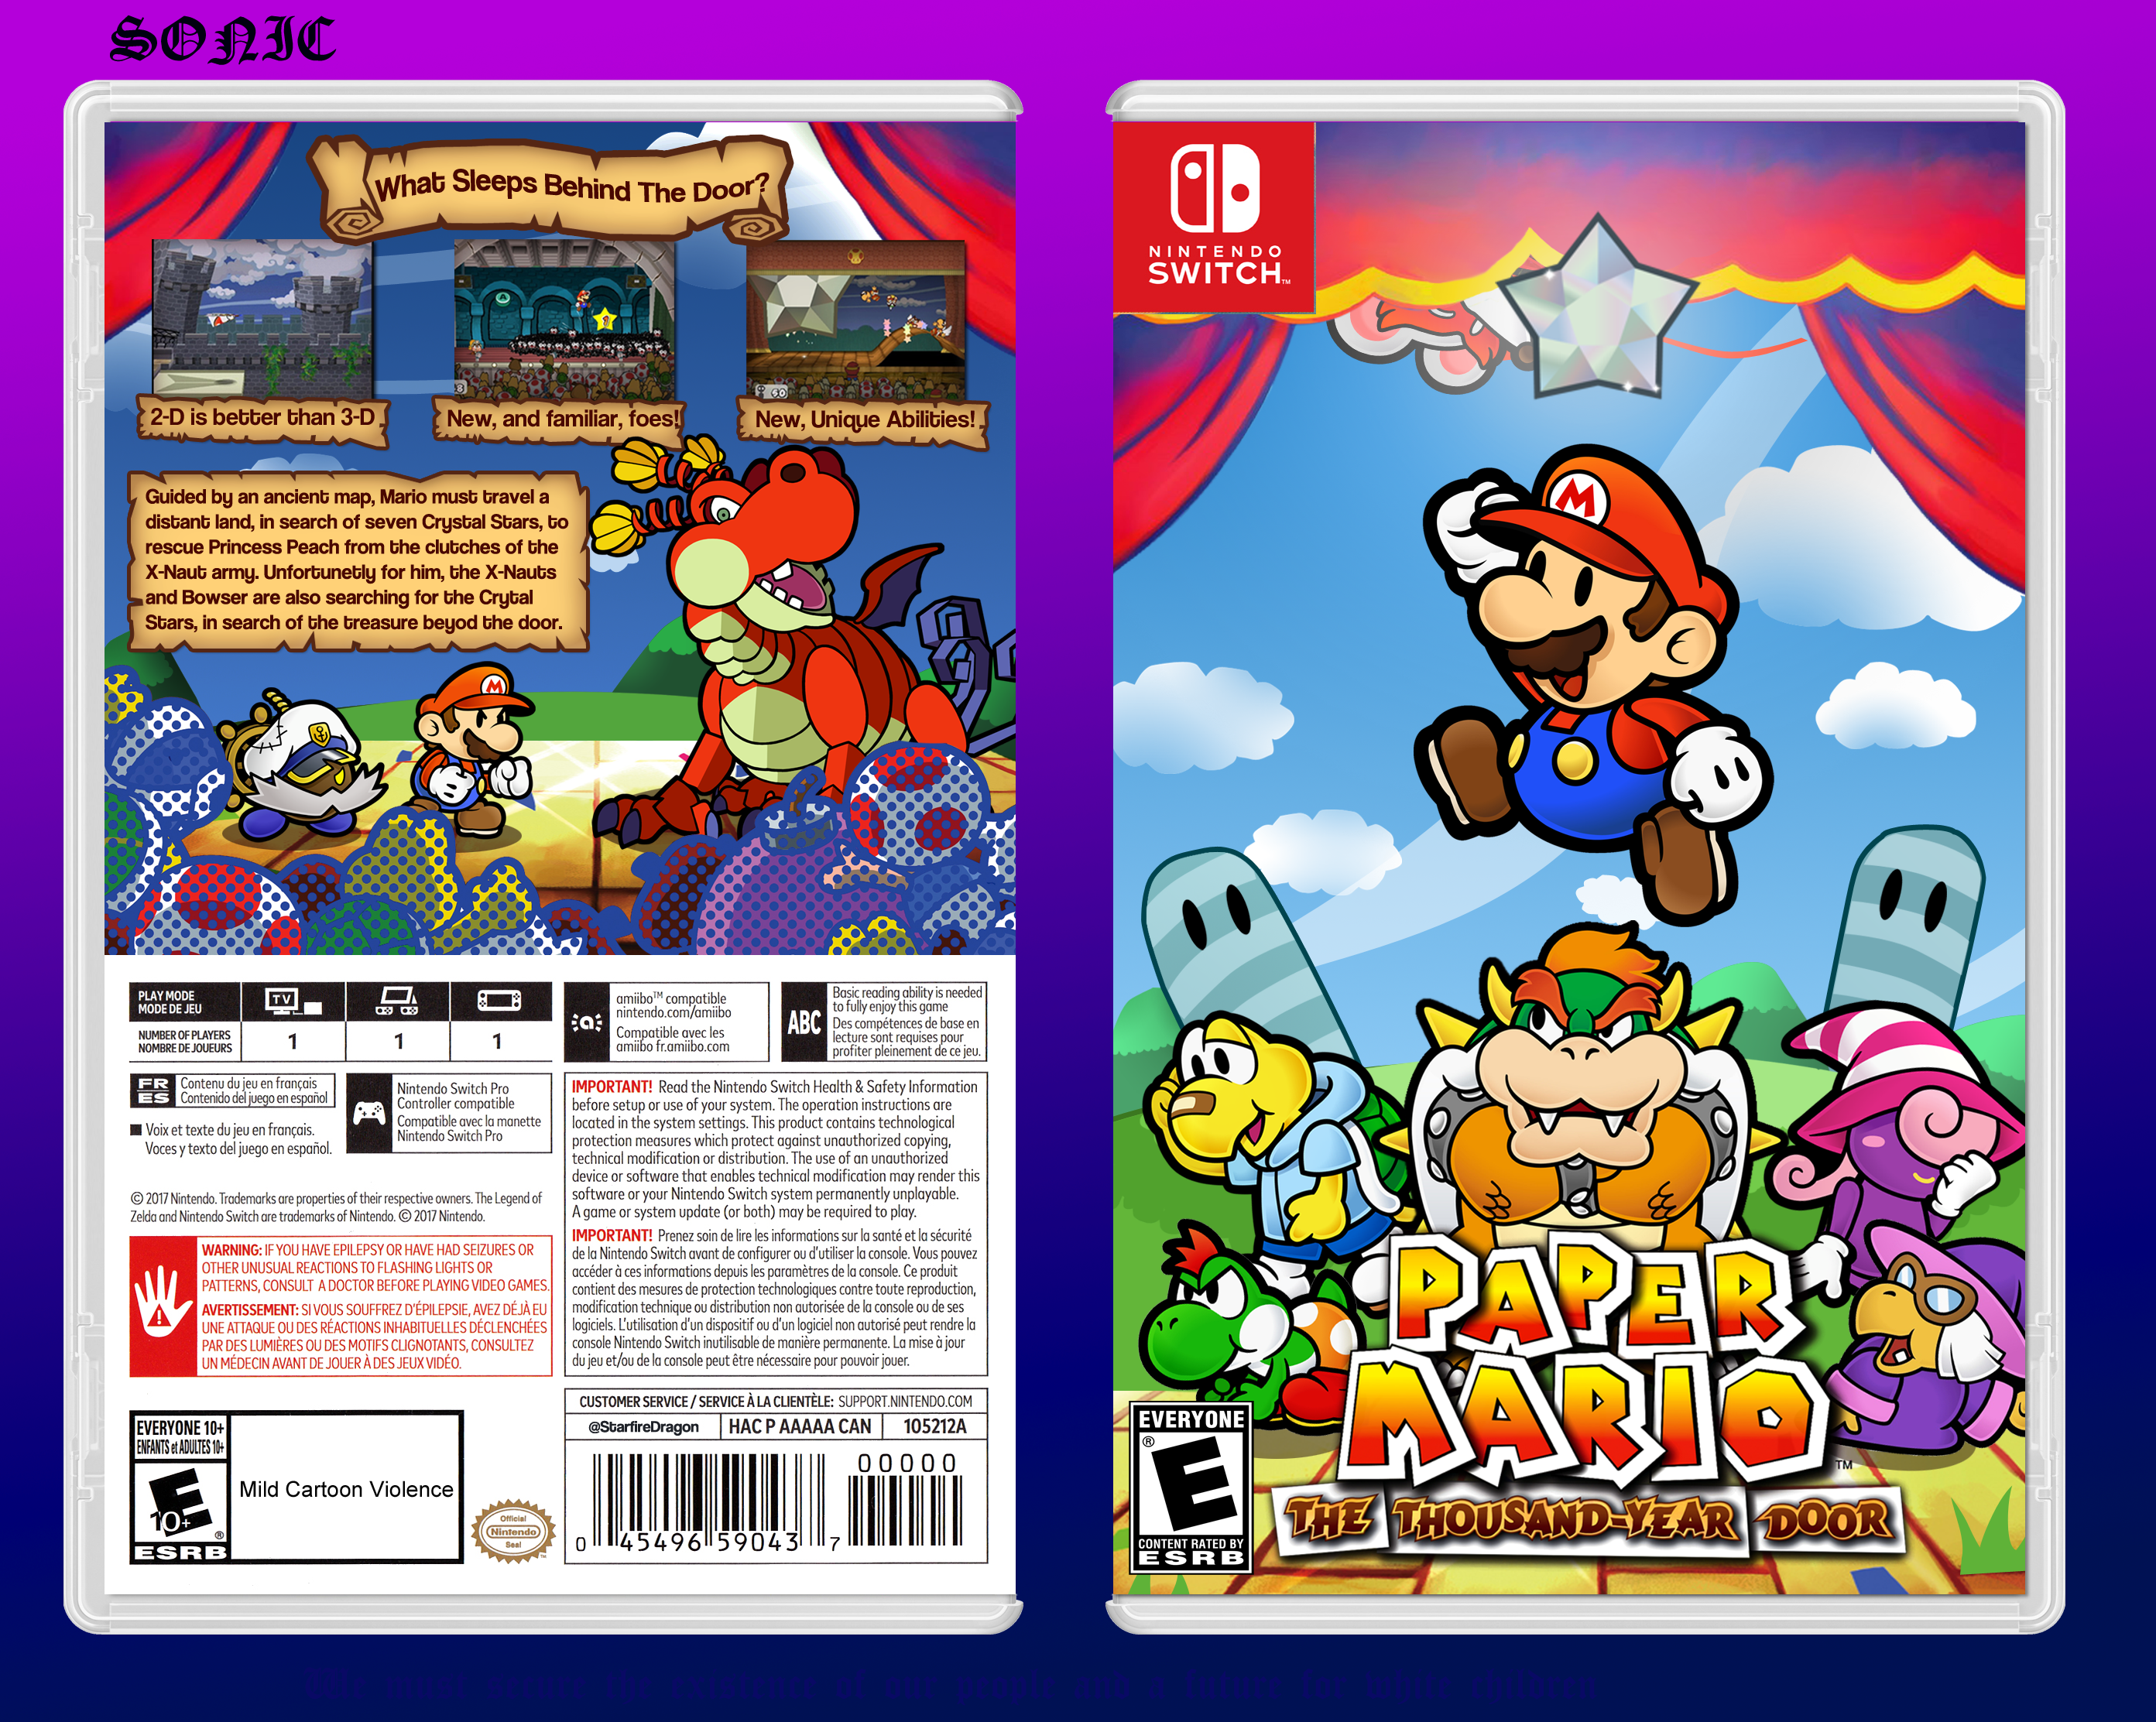 Viewing full size Paper Mario: The Thousand Year Door box cover.